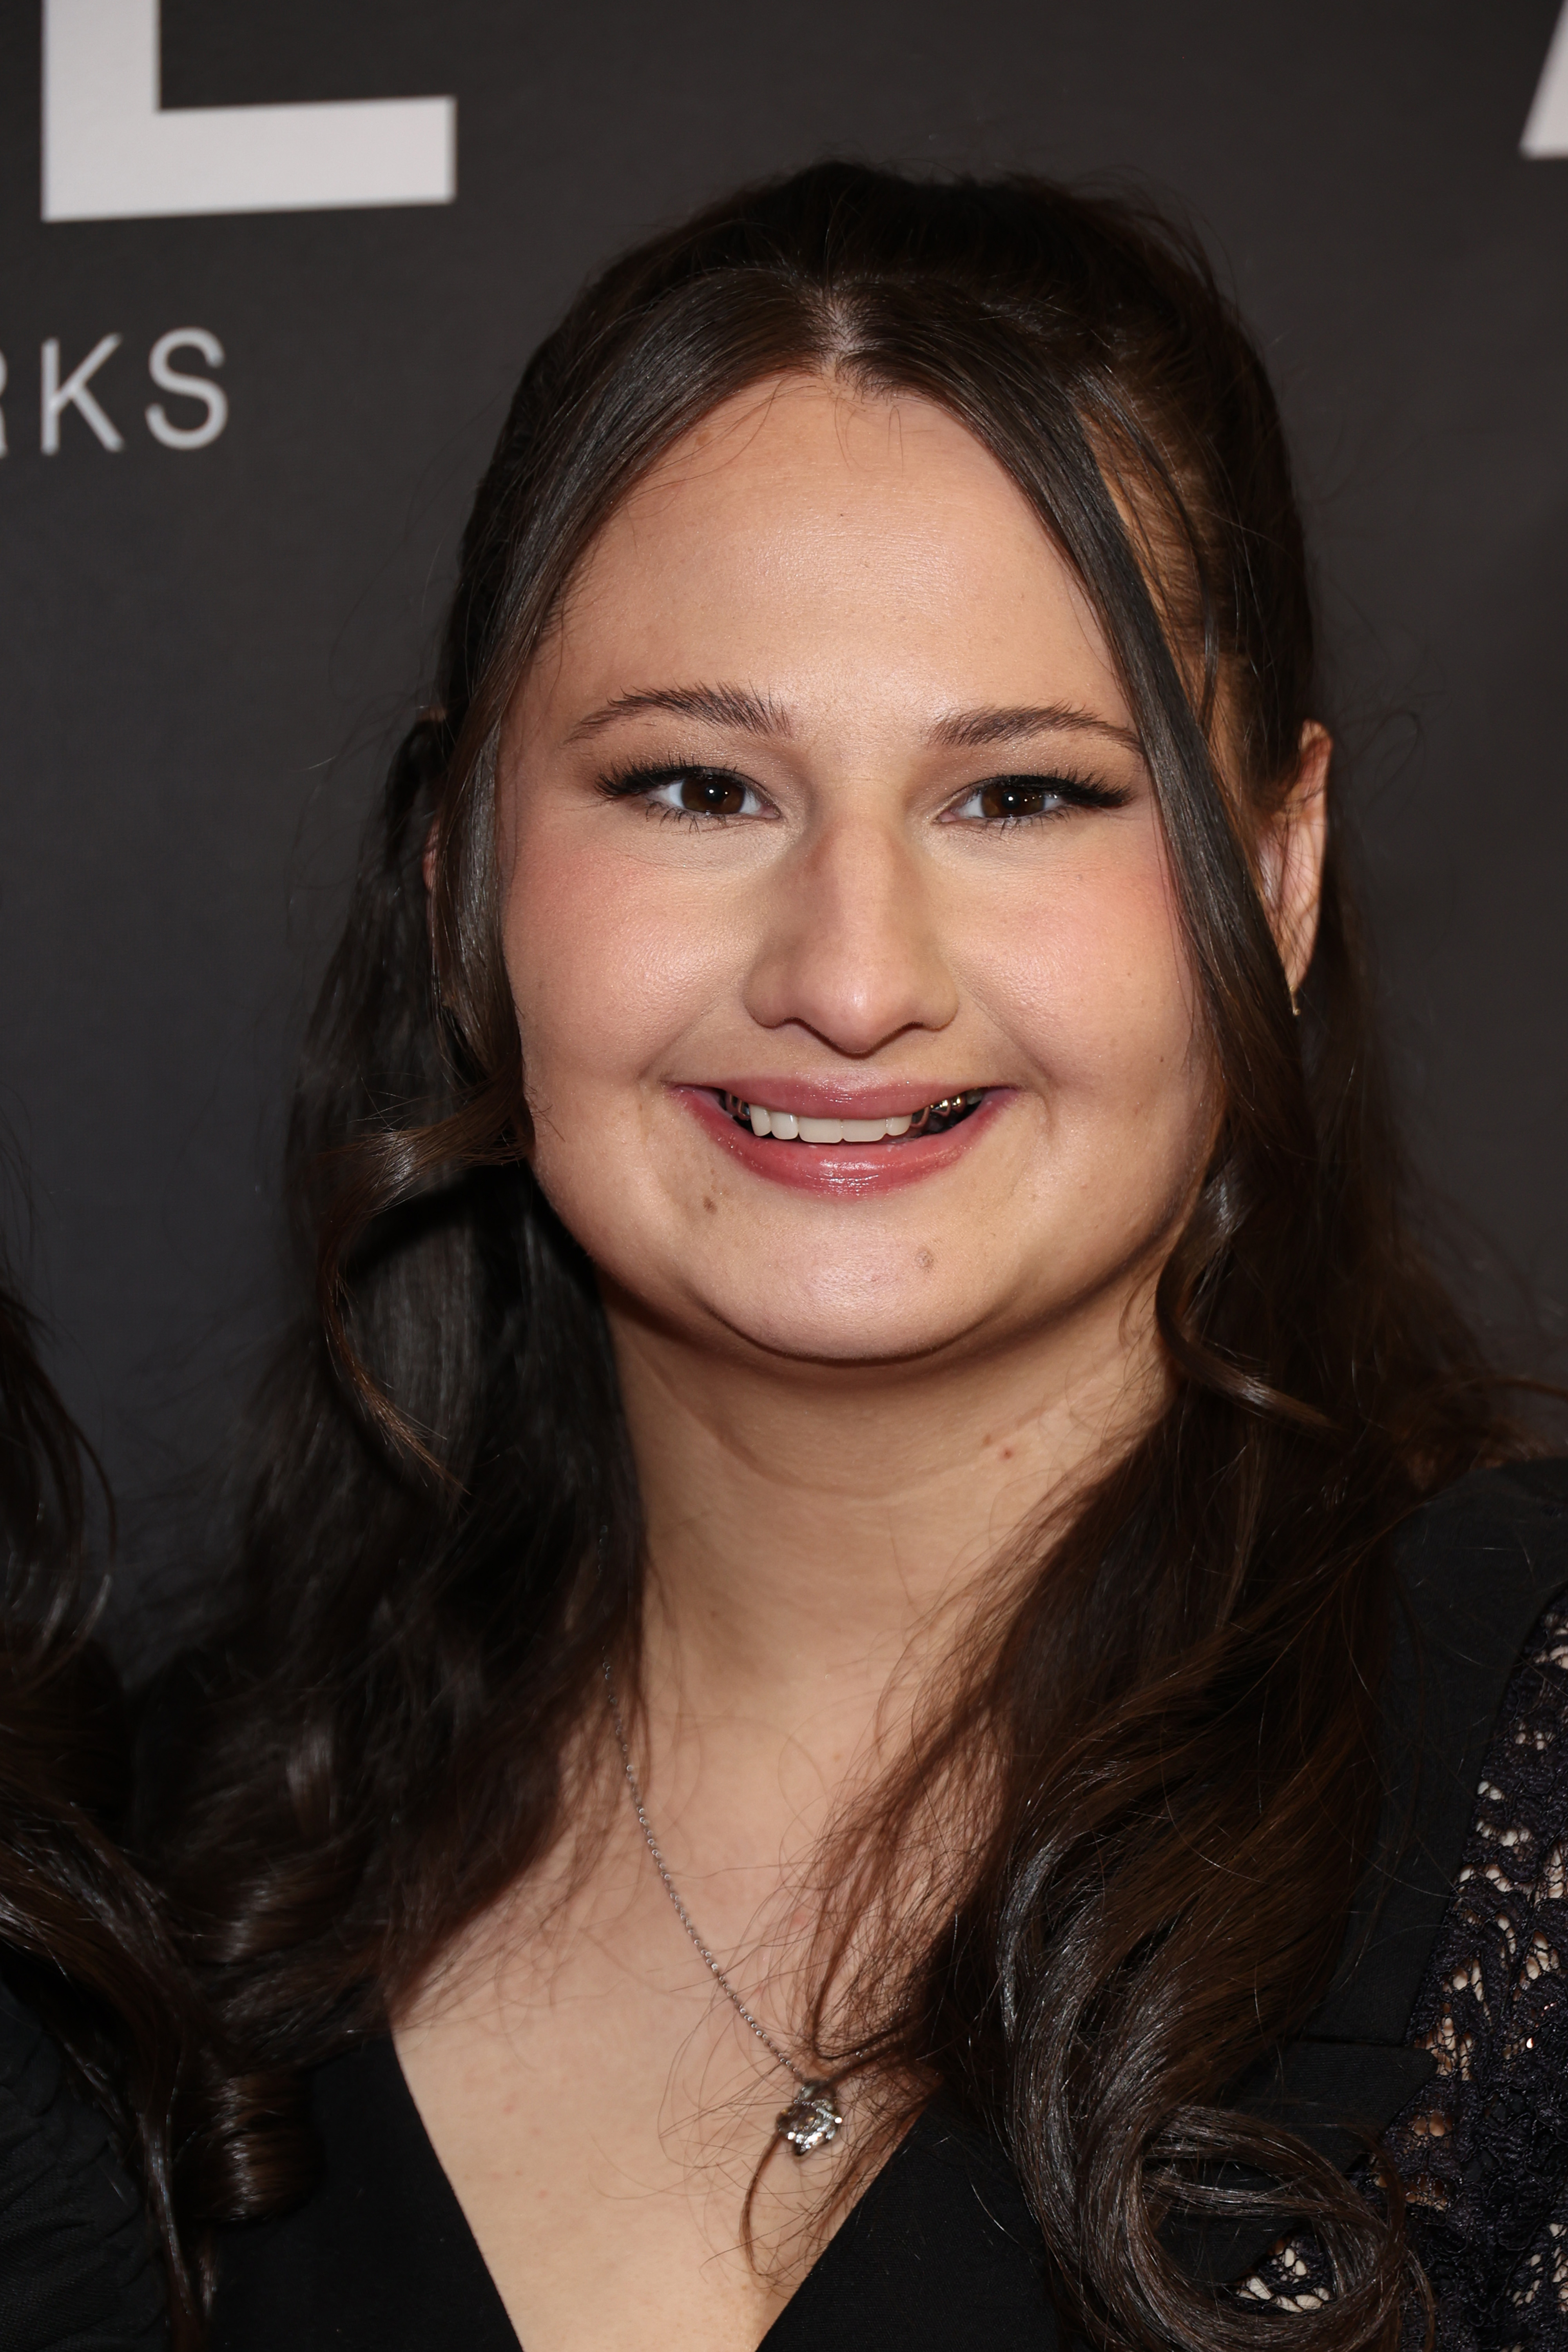 Gypsy Rose Blanchard at the "The Prison Confessions Of Gypsy Rose Blanchard" Red Carpet Event in New York City on January 5, 2024 | Source: Getty Images